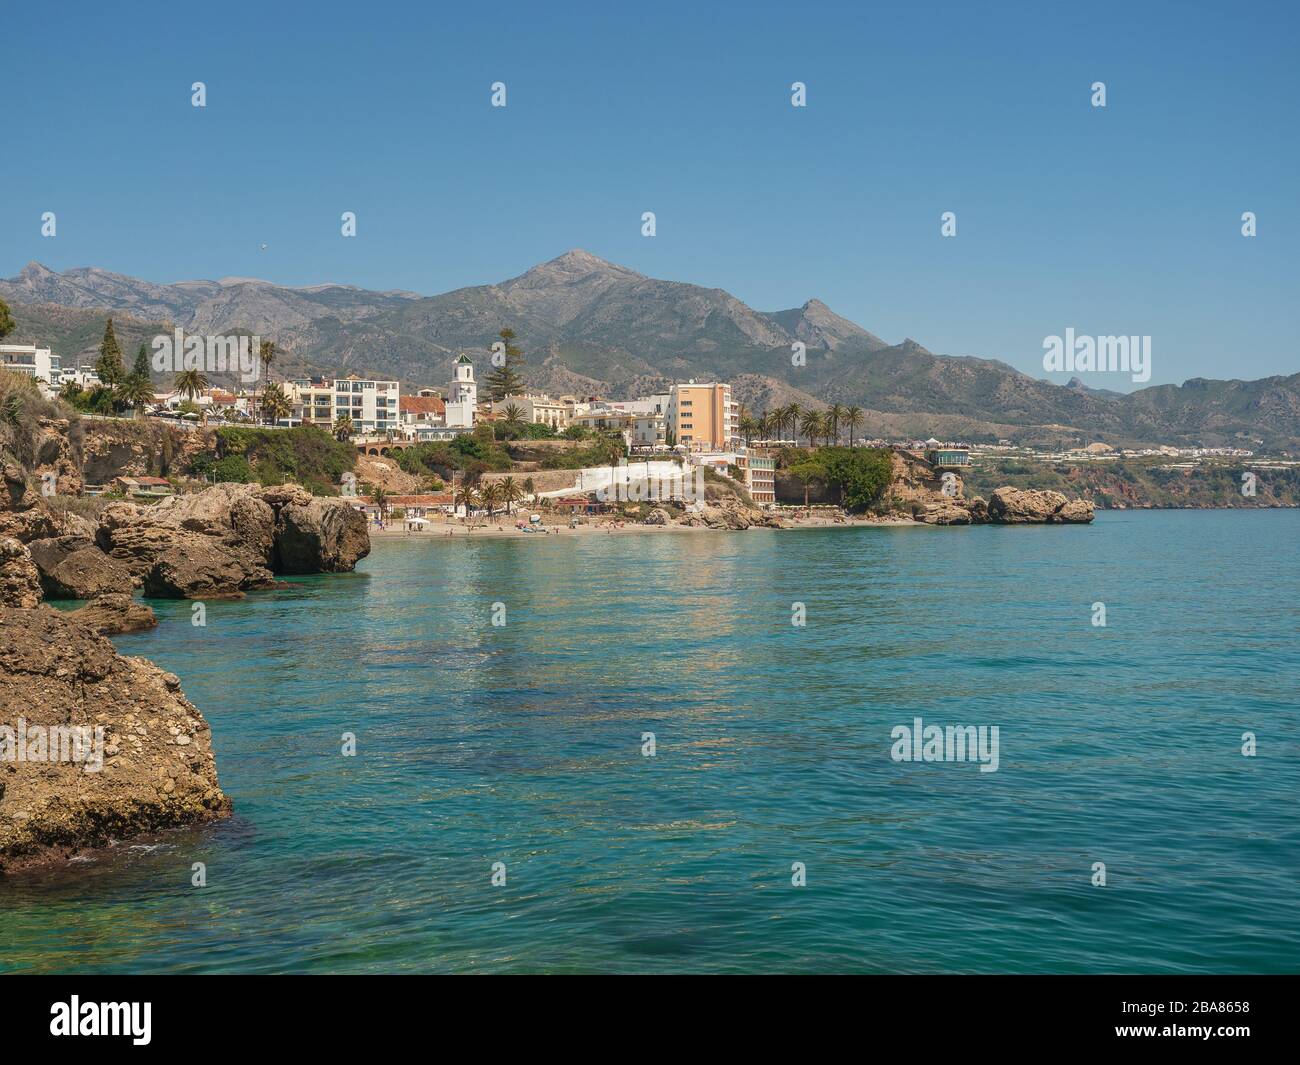 Nerja Costa Del Sol Spain April 194 2019 sTorrecilla Beach in Nerja with hotels and apartments and  El Salon Beach Stock Photo